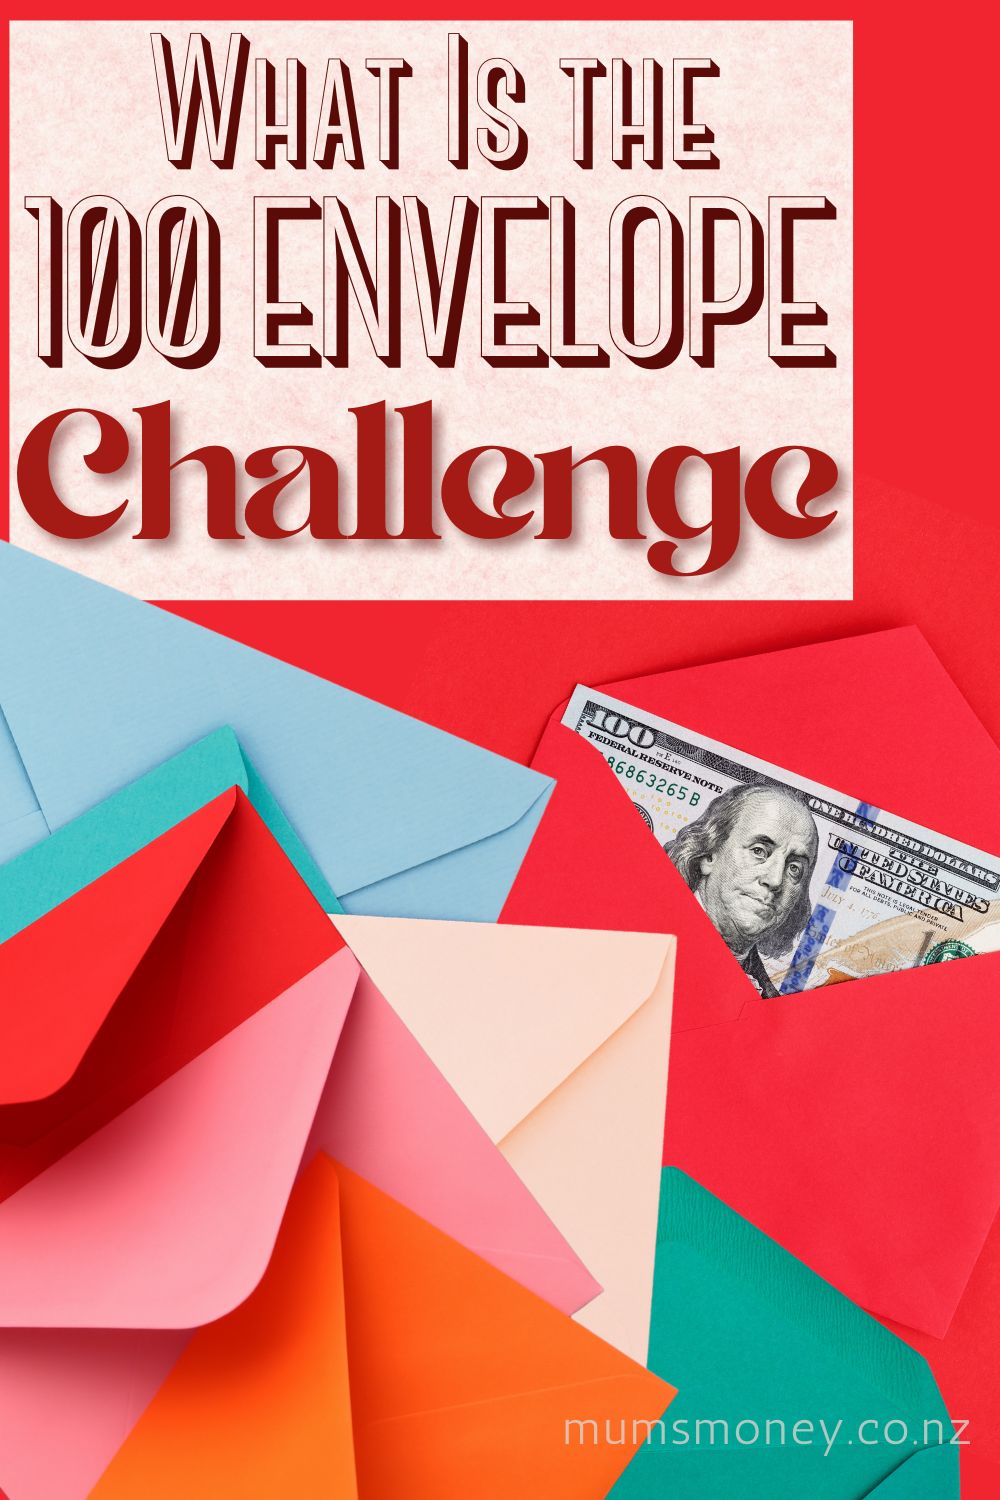 What Is the 100 Envelope Challenge